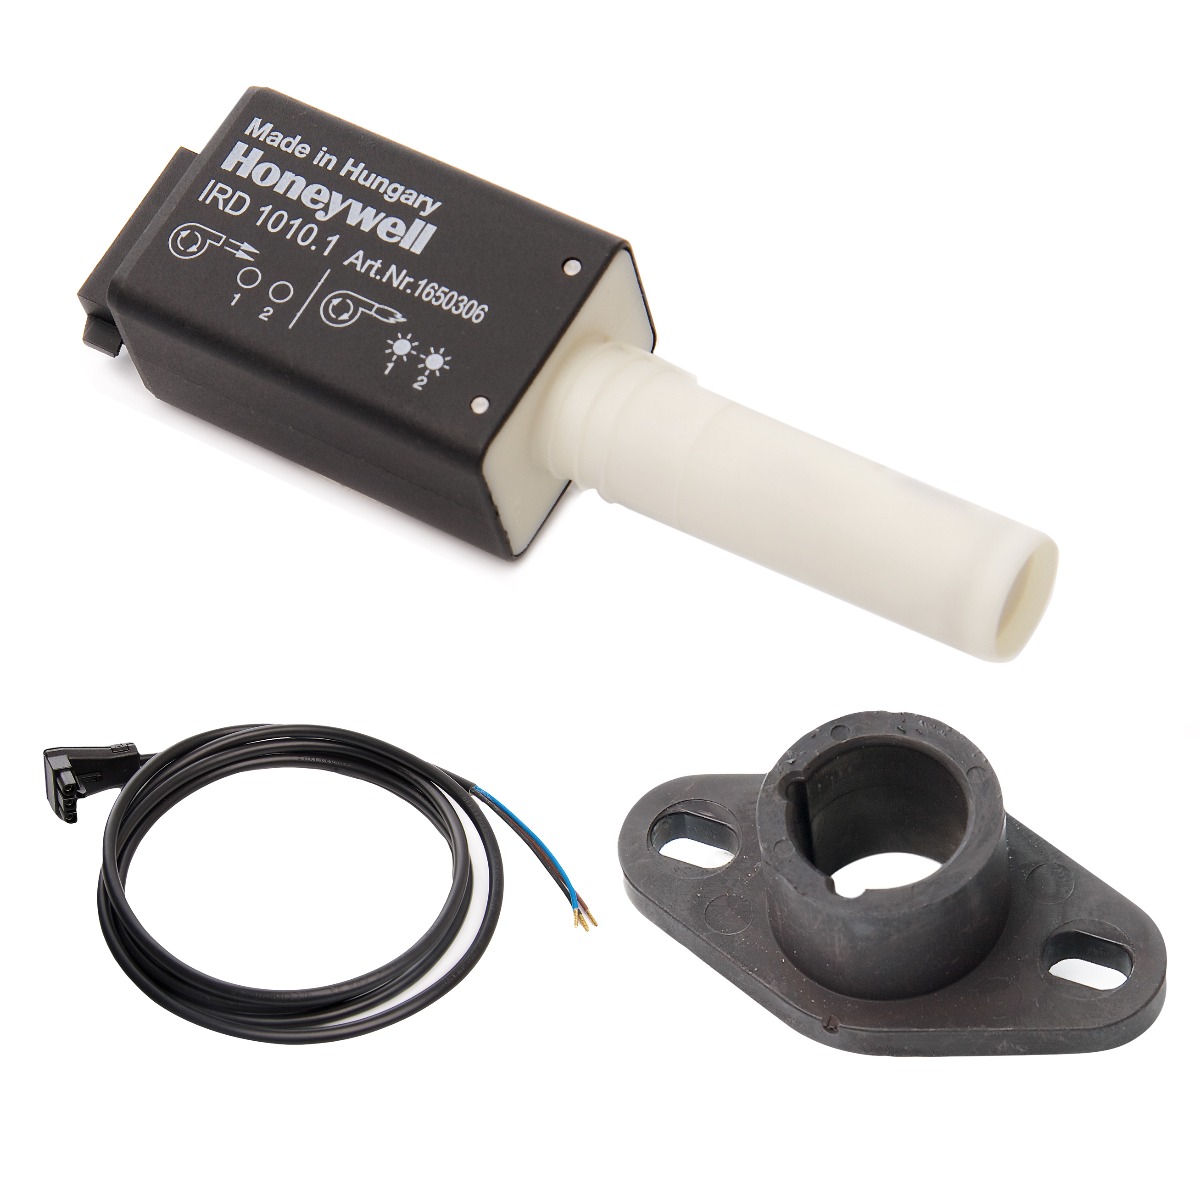 IRD1010 16502 Photocell End View C/W 1.8m Lead & Holder